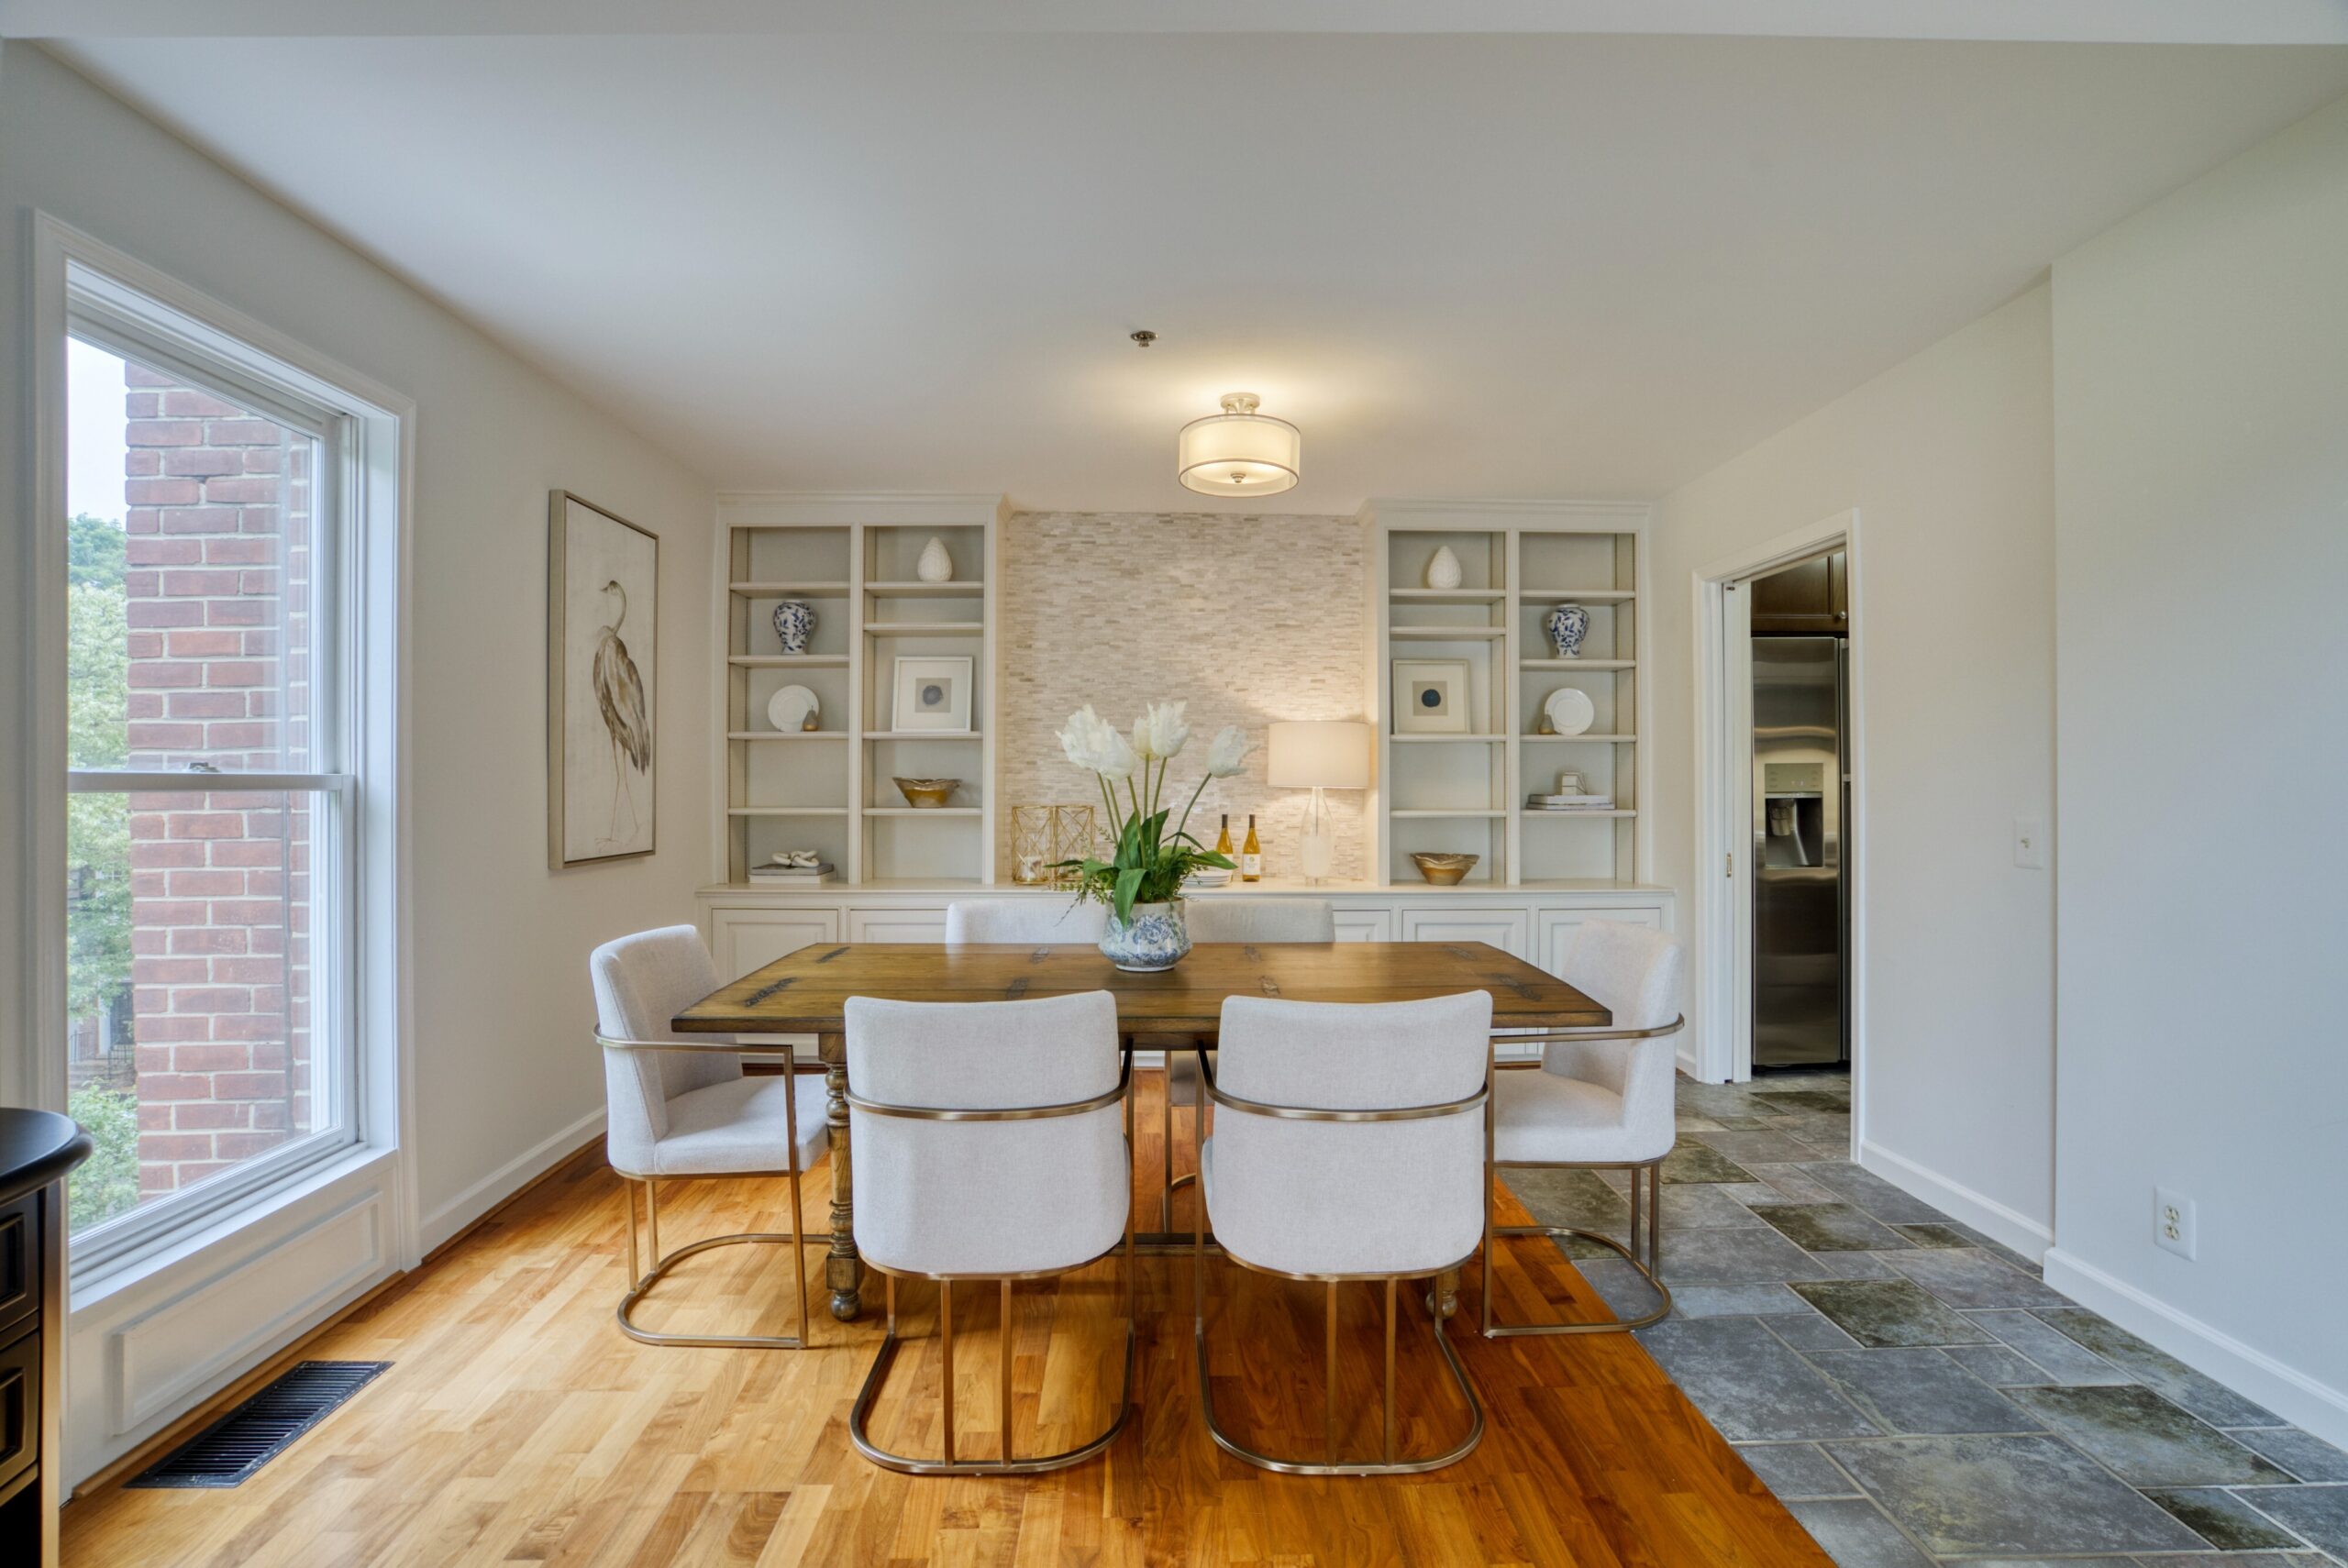 Professional interior photo of 125 N Lee St #401, Alexandria, VA - showing the dining room with built-in shelves, stone statement wall, hardwood and stone tile floors